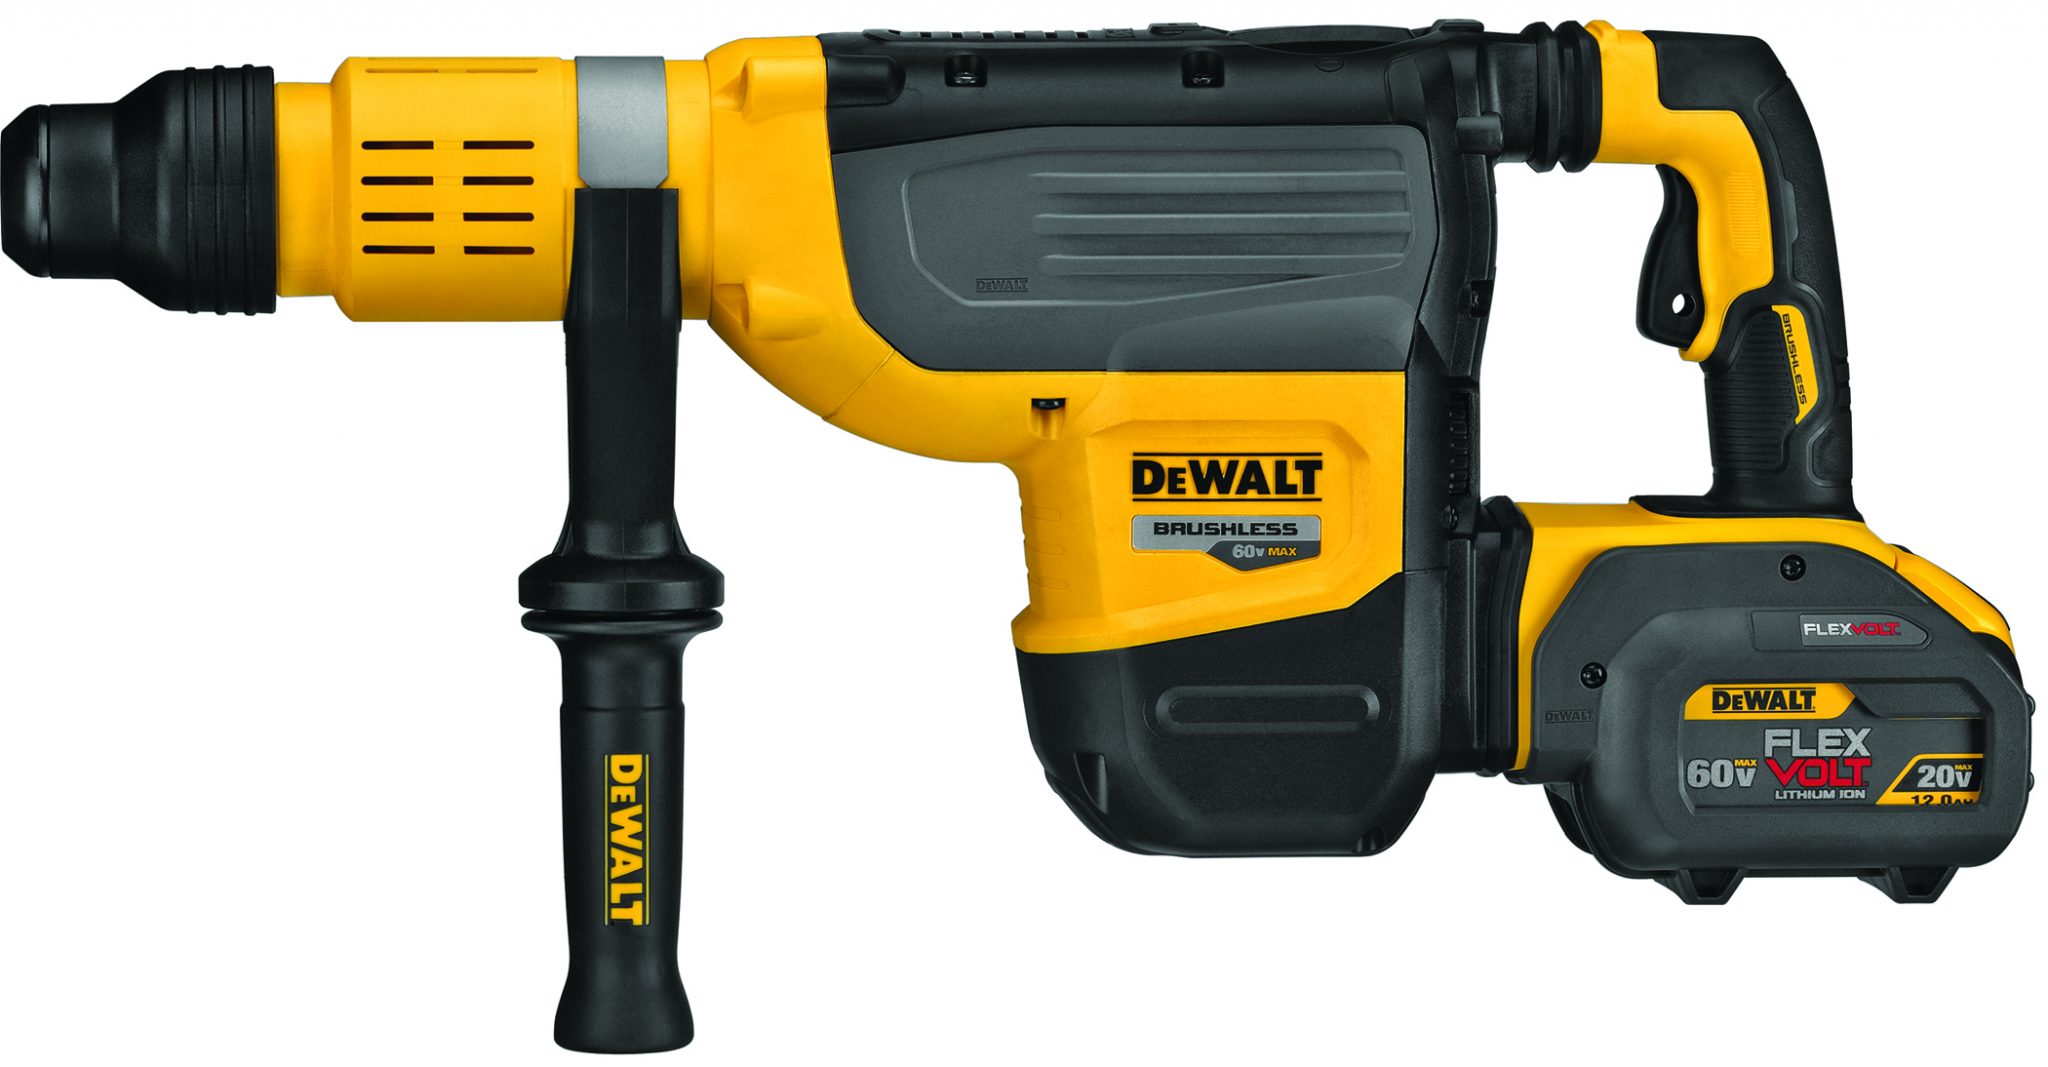 DEWALT® Adds to Rotary Hammer Lineup at World of Concrete® 2019